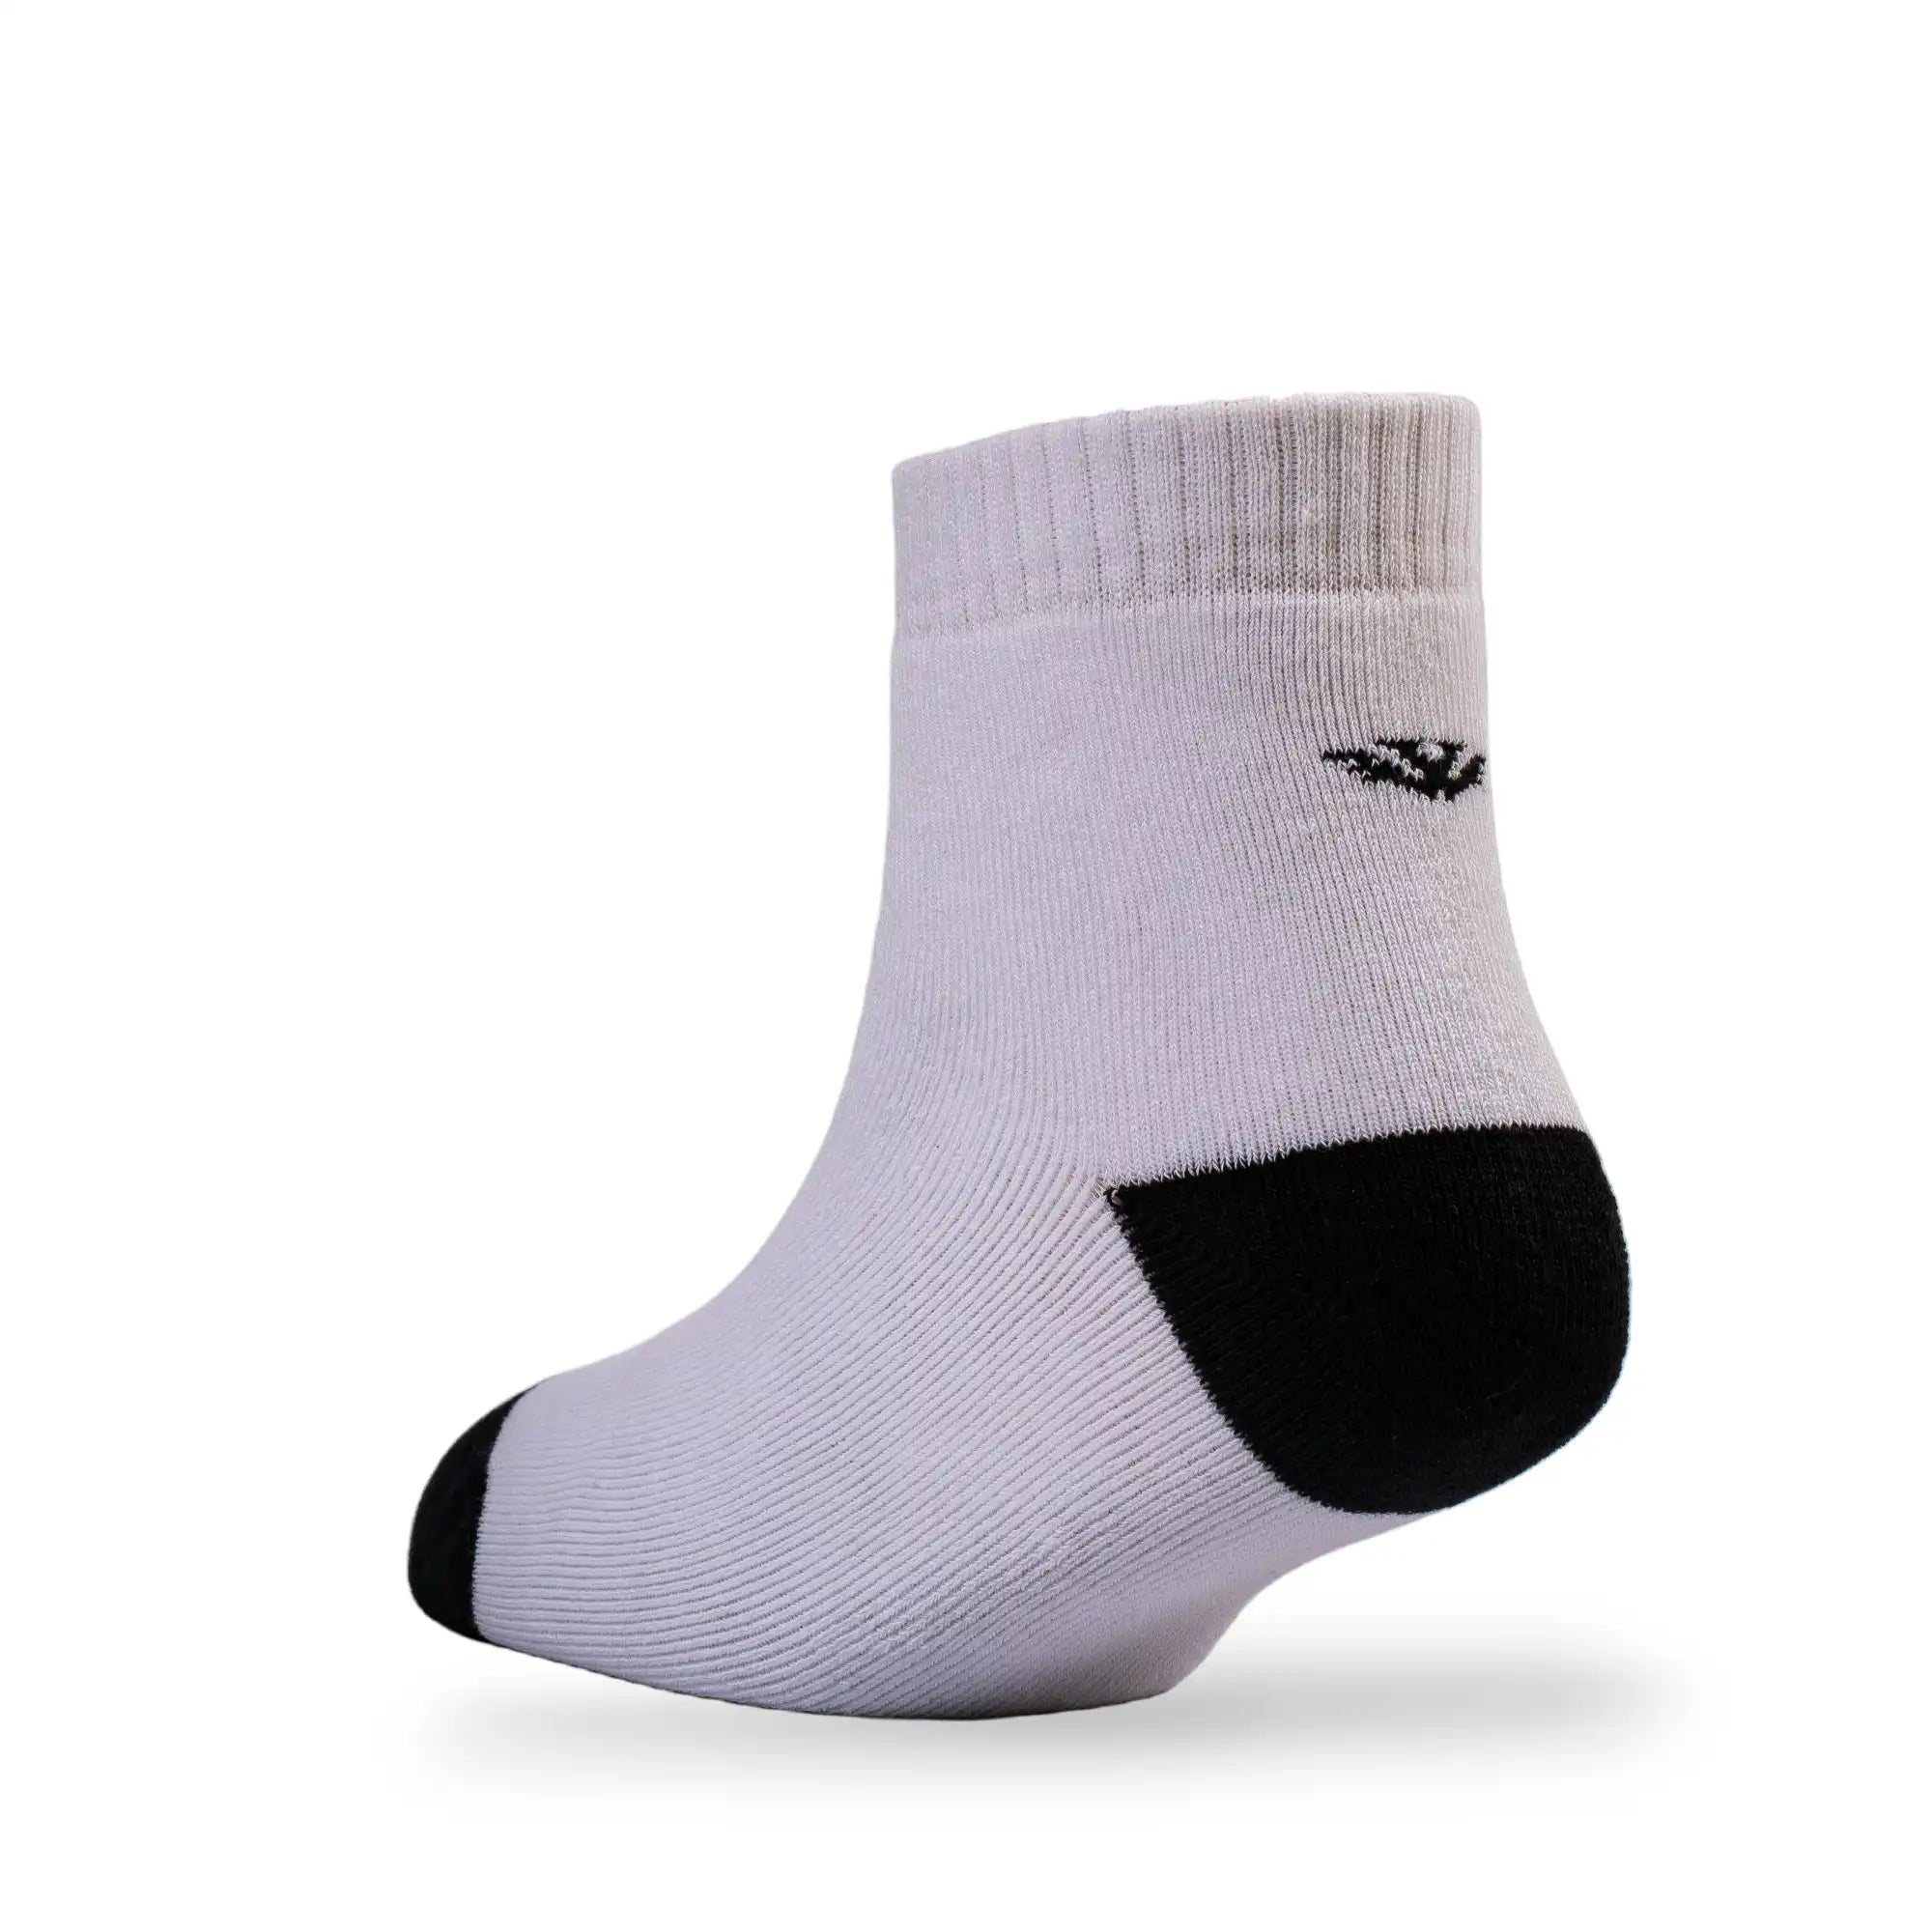 Young Wings Men's Multi Colour Cotton Fabric Design Ankle Length Socks - Pack of 3, Style no. 2603-M1